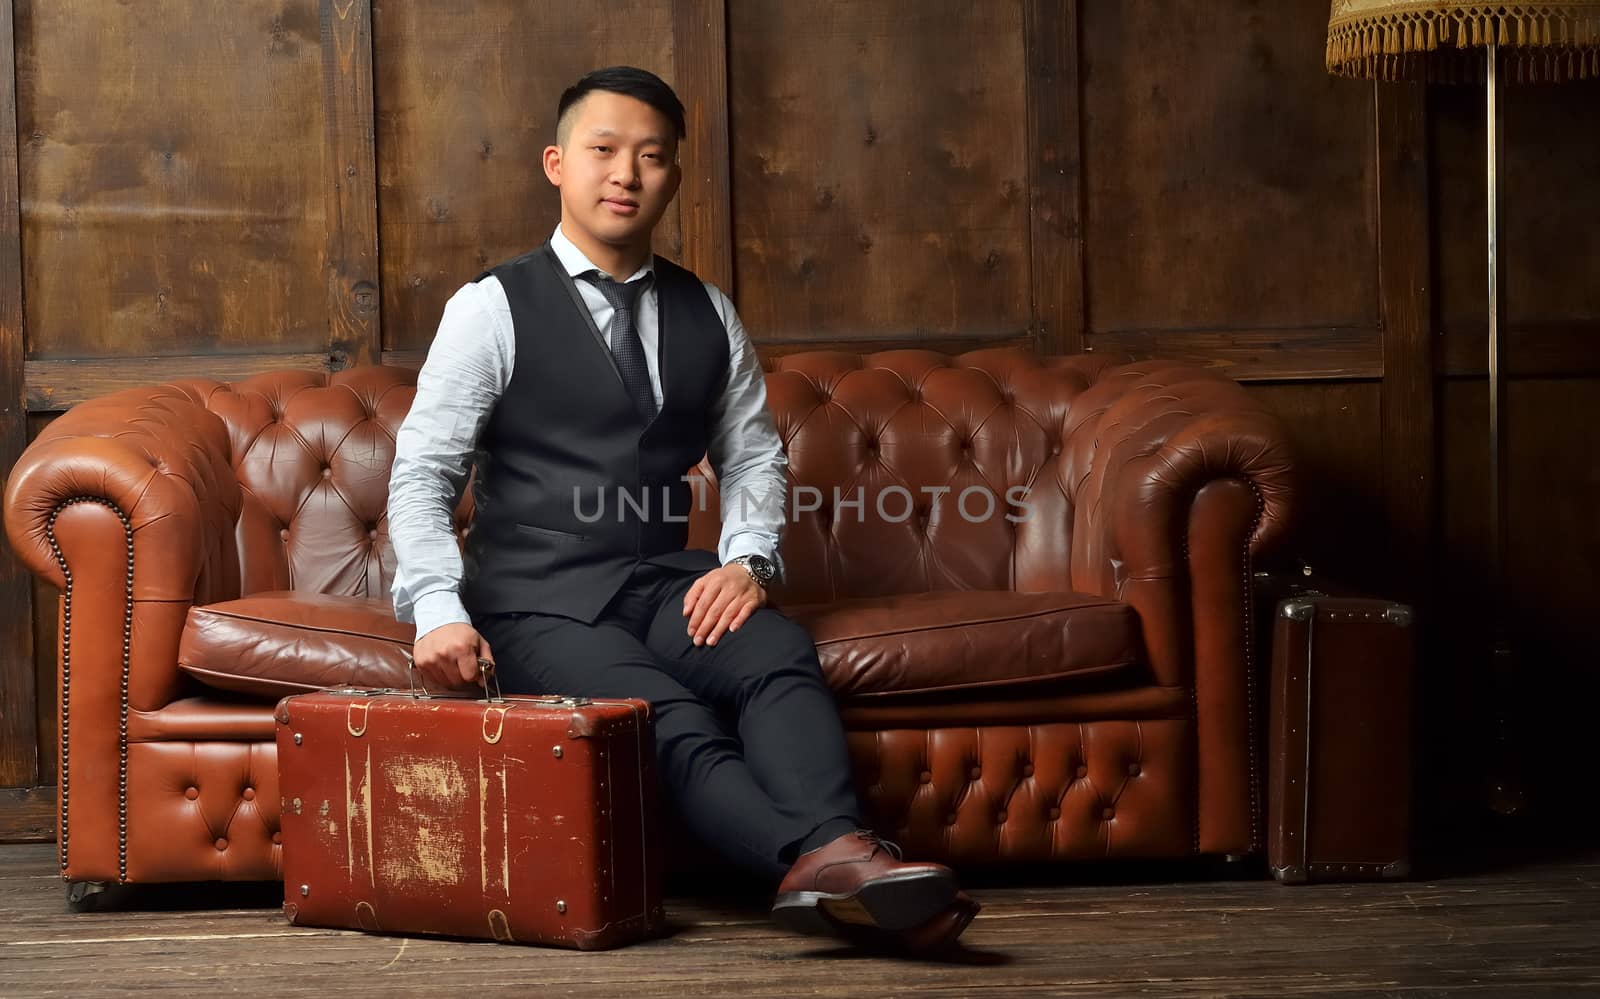 A young man in a suit sits on a leather brown sofa with a suitcase